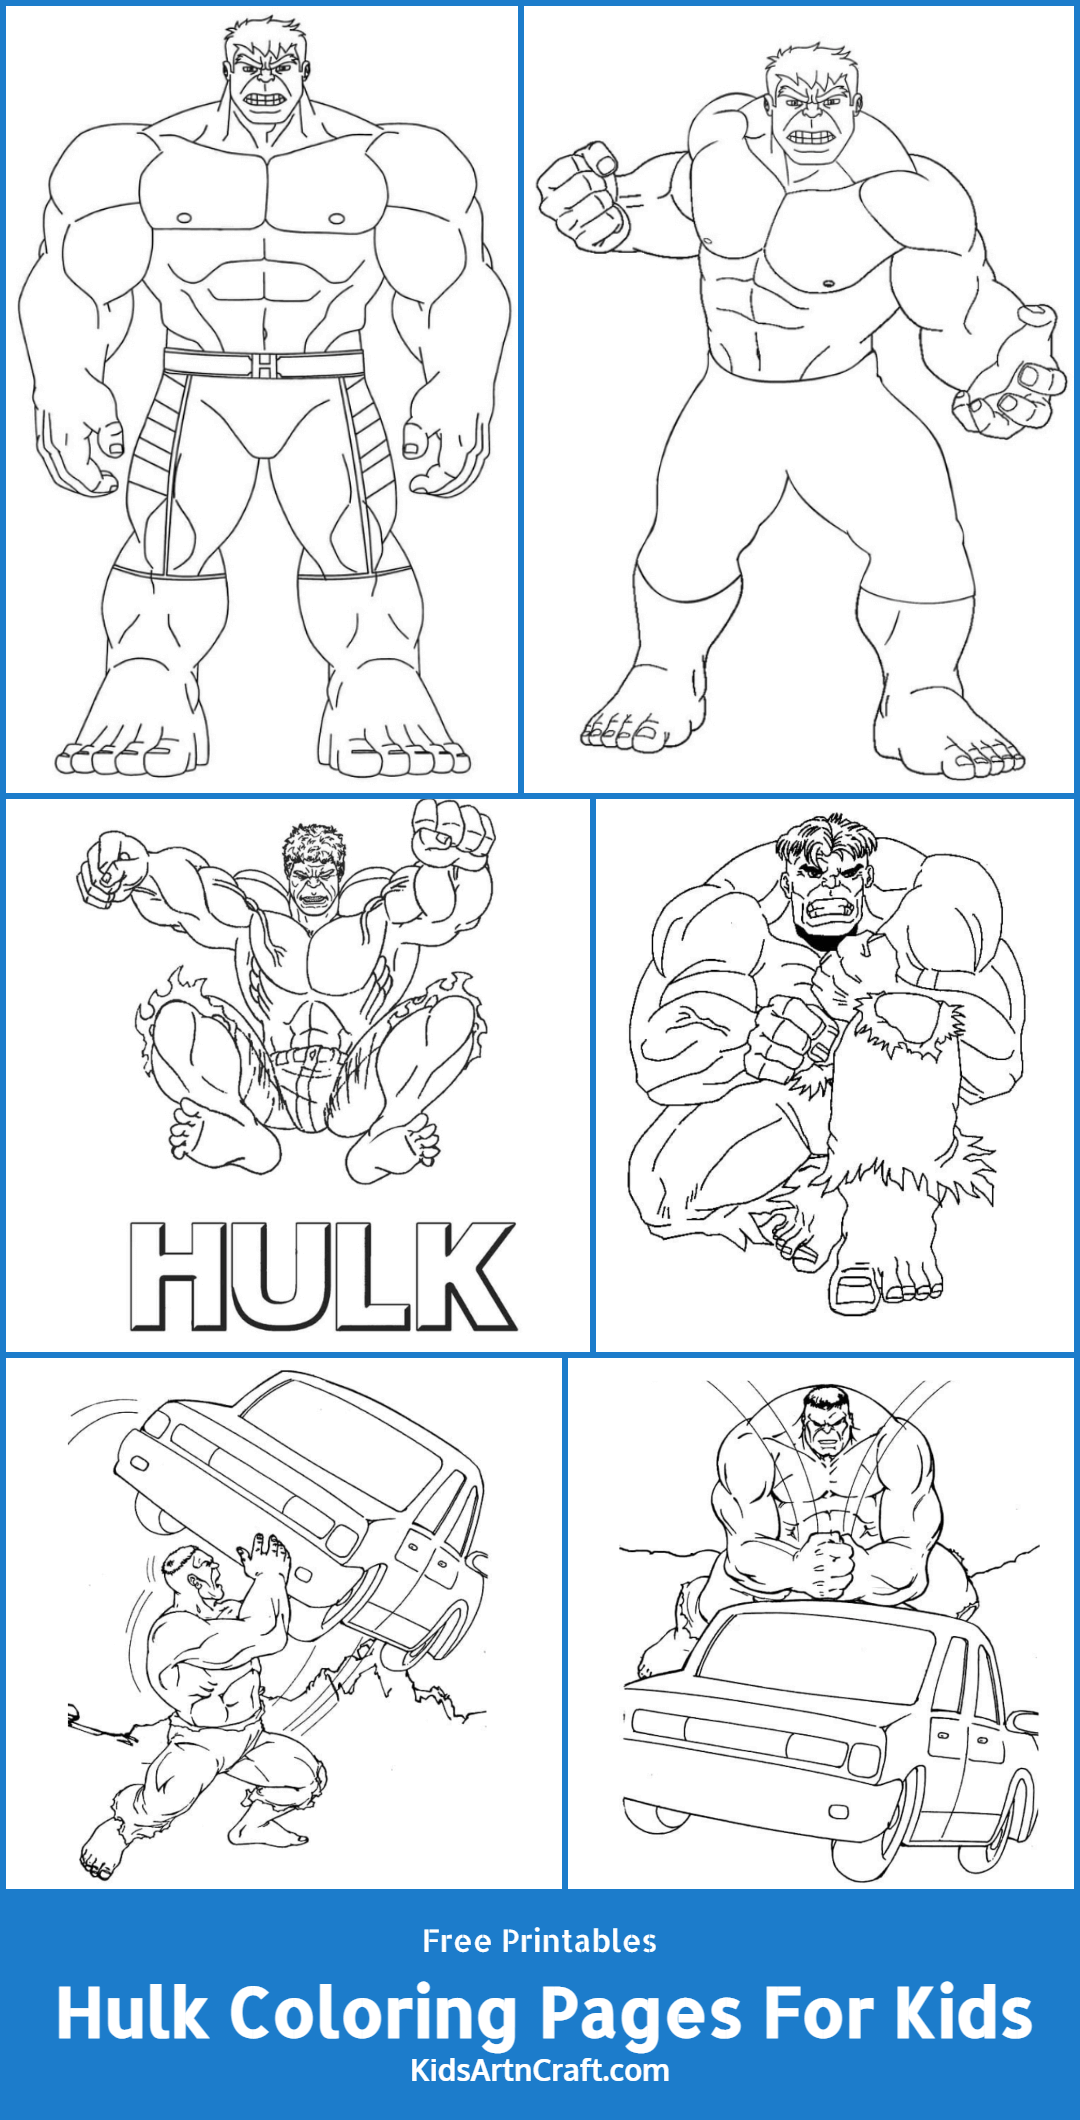 Hulk Coloring Pages For Kids – Free Printables